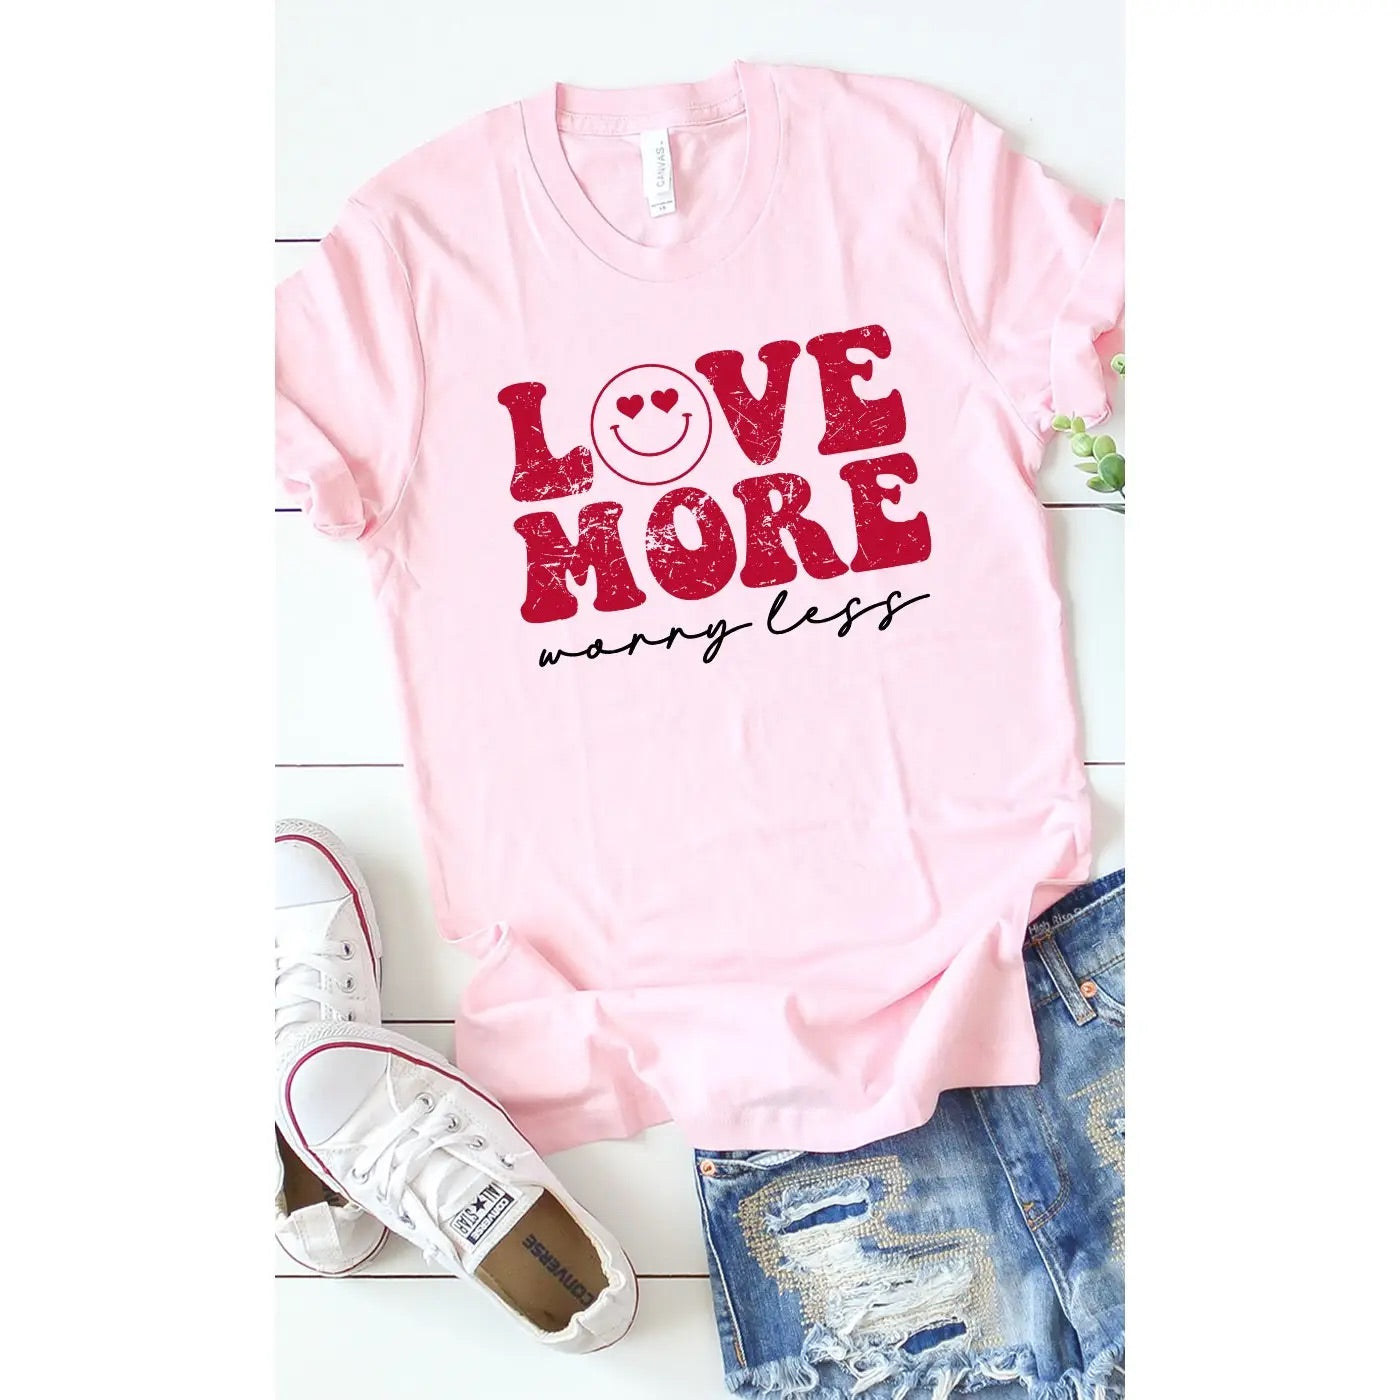 Love More Worry Less Graphic Tee